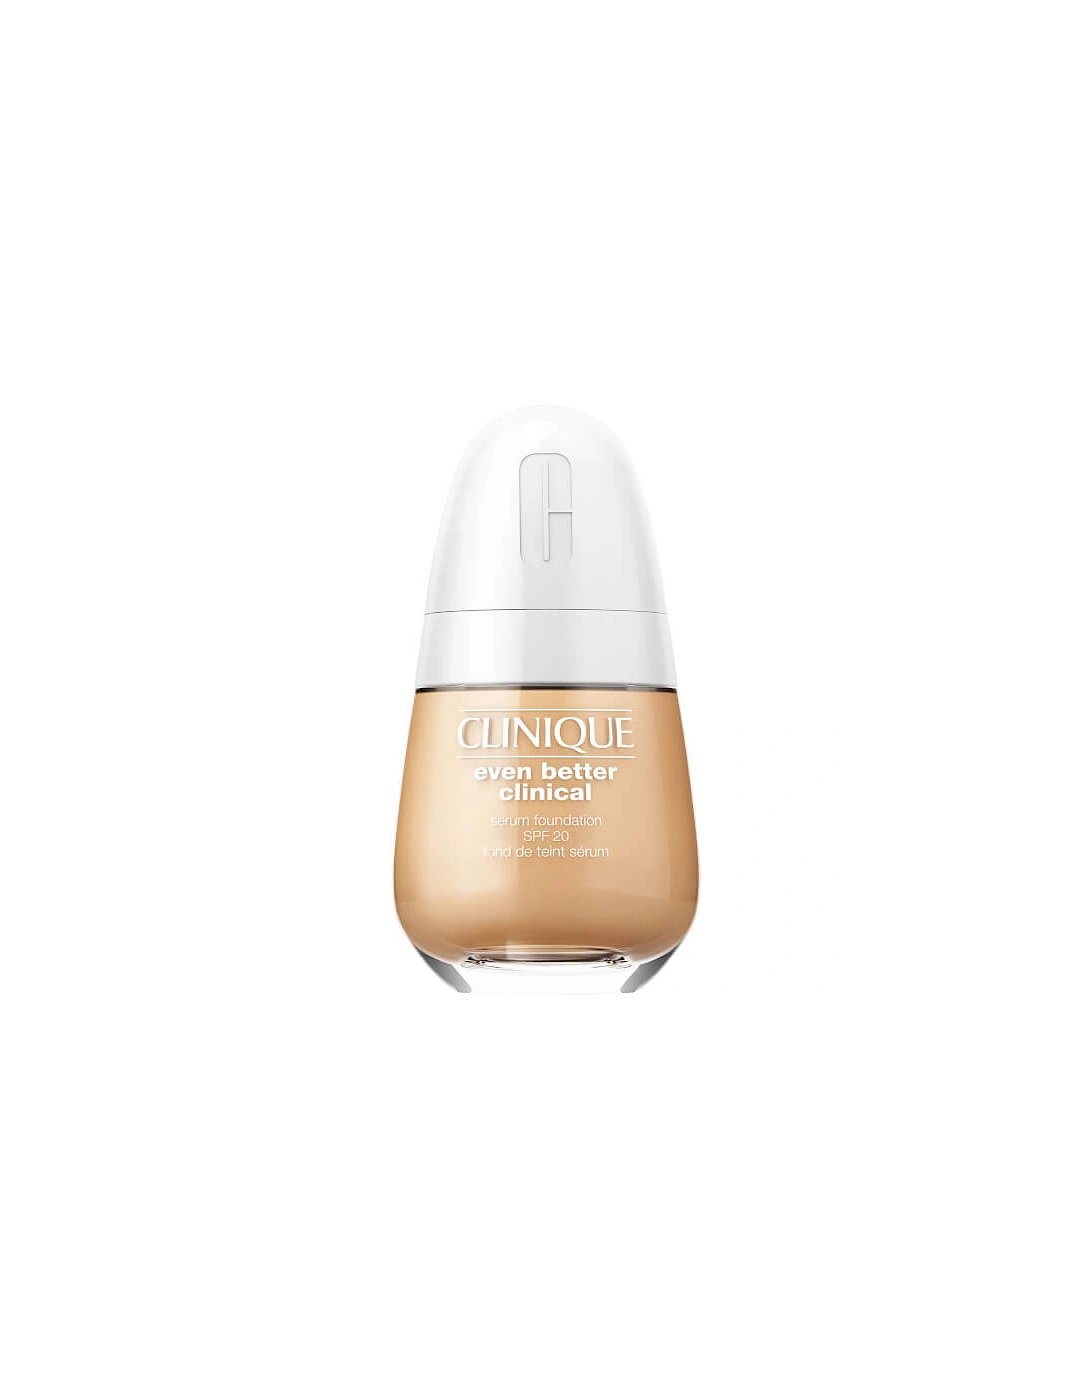 Even Better Clinical Serum Foundation SPF20 - Stone, 2 of 1